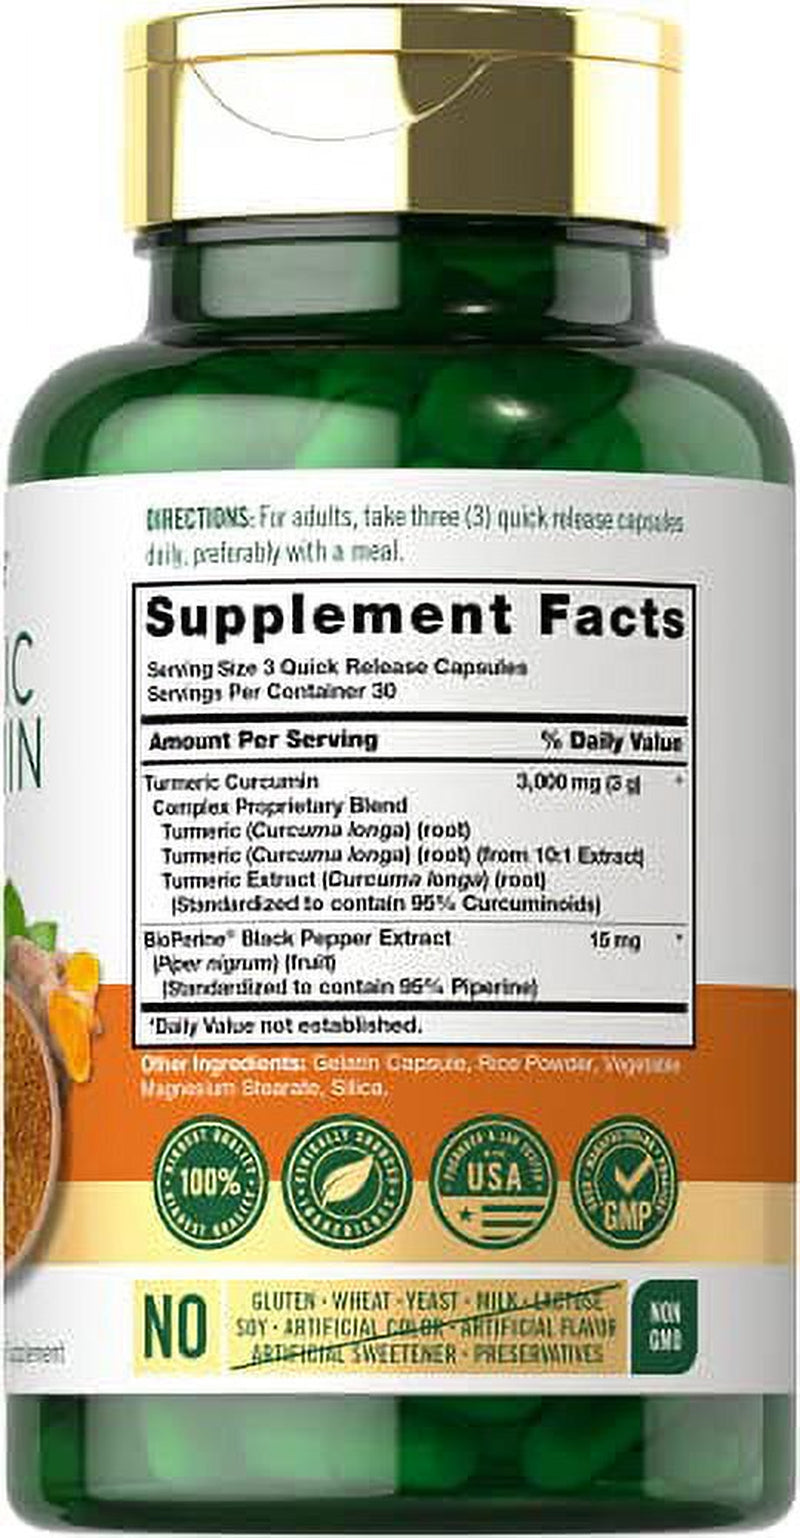 Turmeric Curcumin with Bioperine | 3000 Mg | 90 Powder Capsules | Joint Support Complex with Black Pepper | Non-Gmo, Gluten Free Supplement | by Carlyle